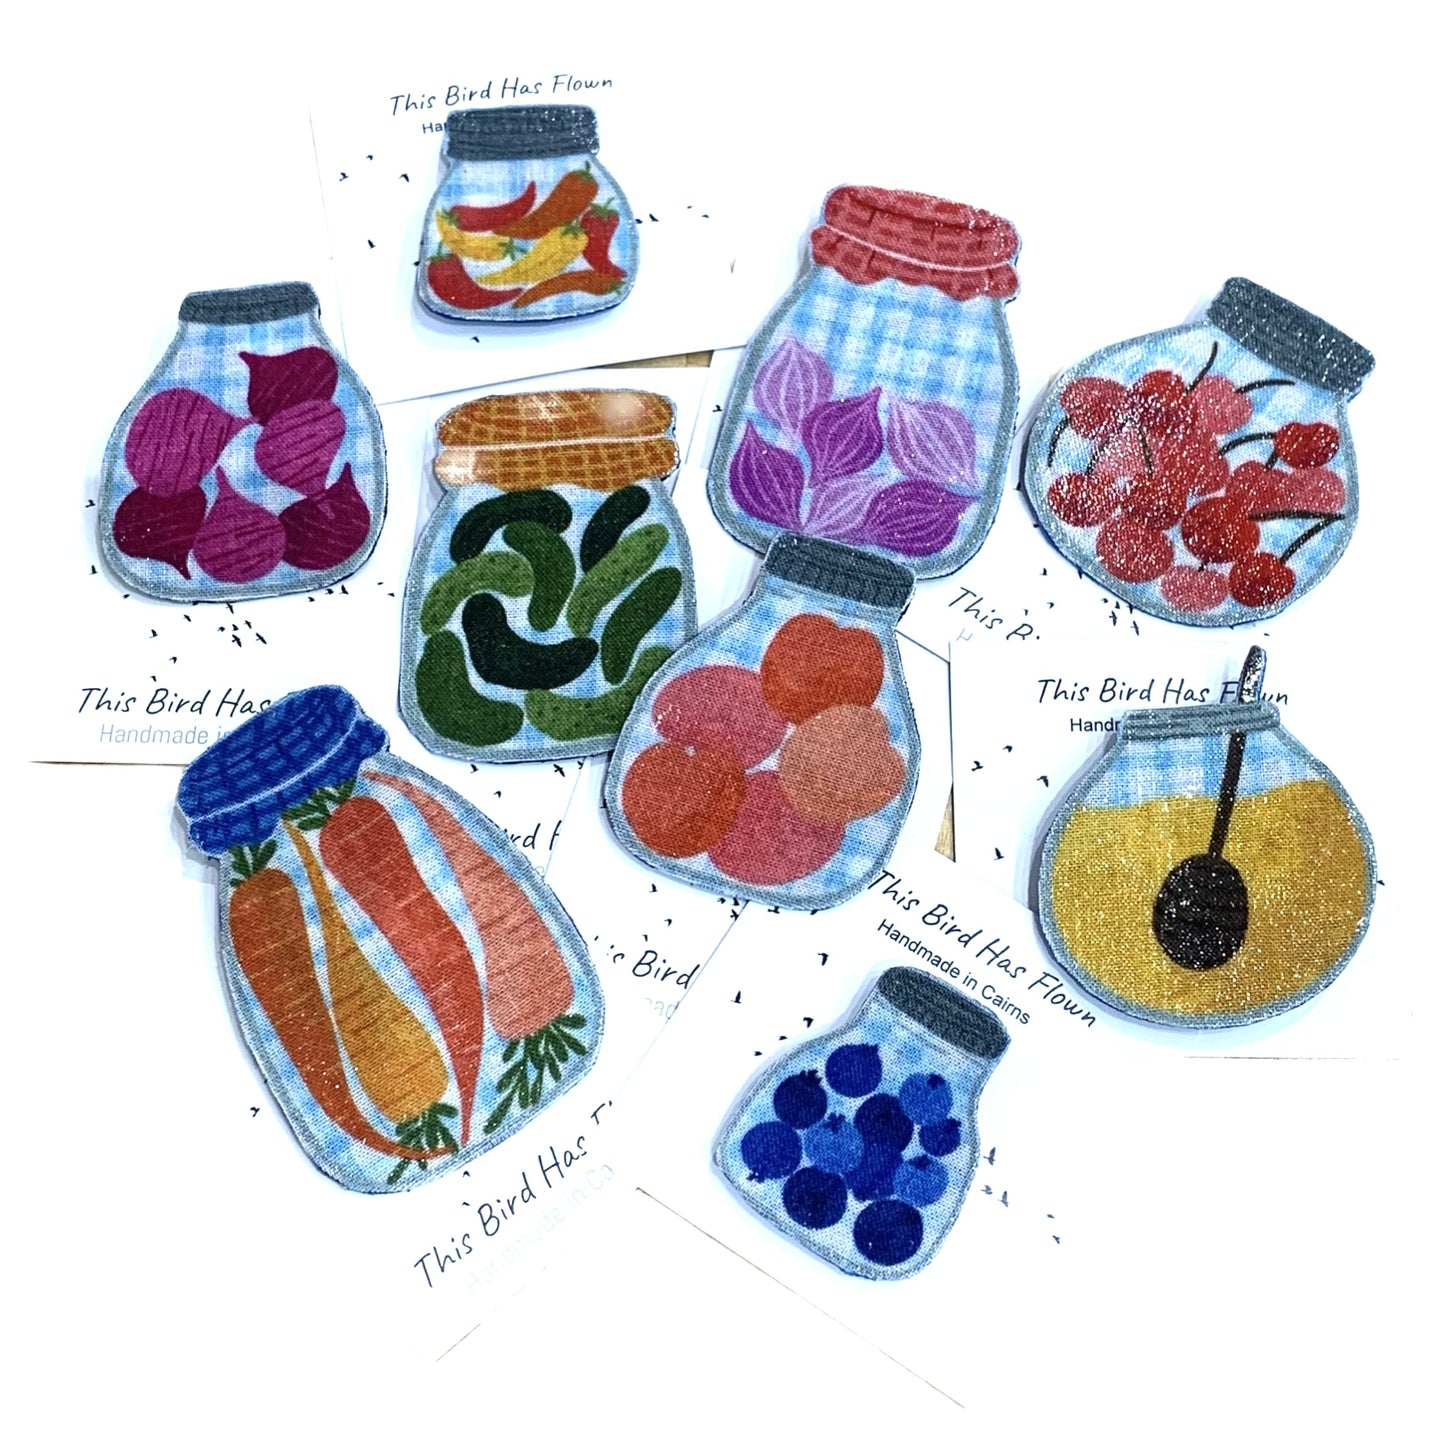 THIS BIRD HAS FLOWN- "Pickles & Preserves" Remnant Brooches- Large Pickled Carrots Jar